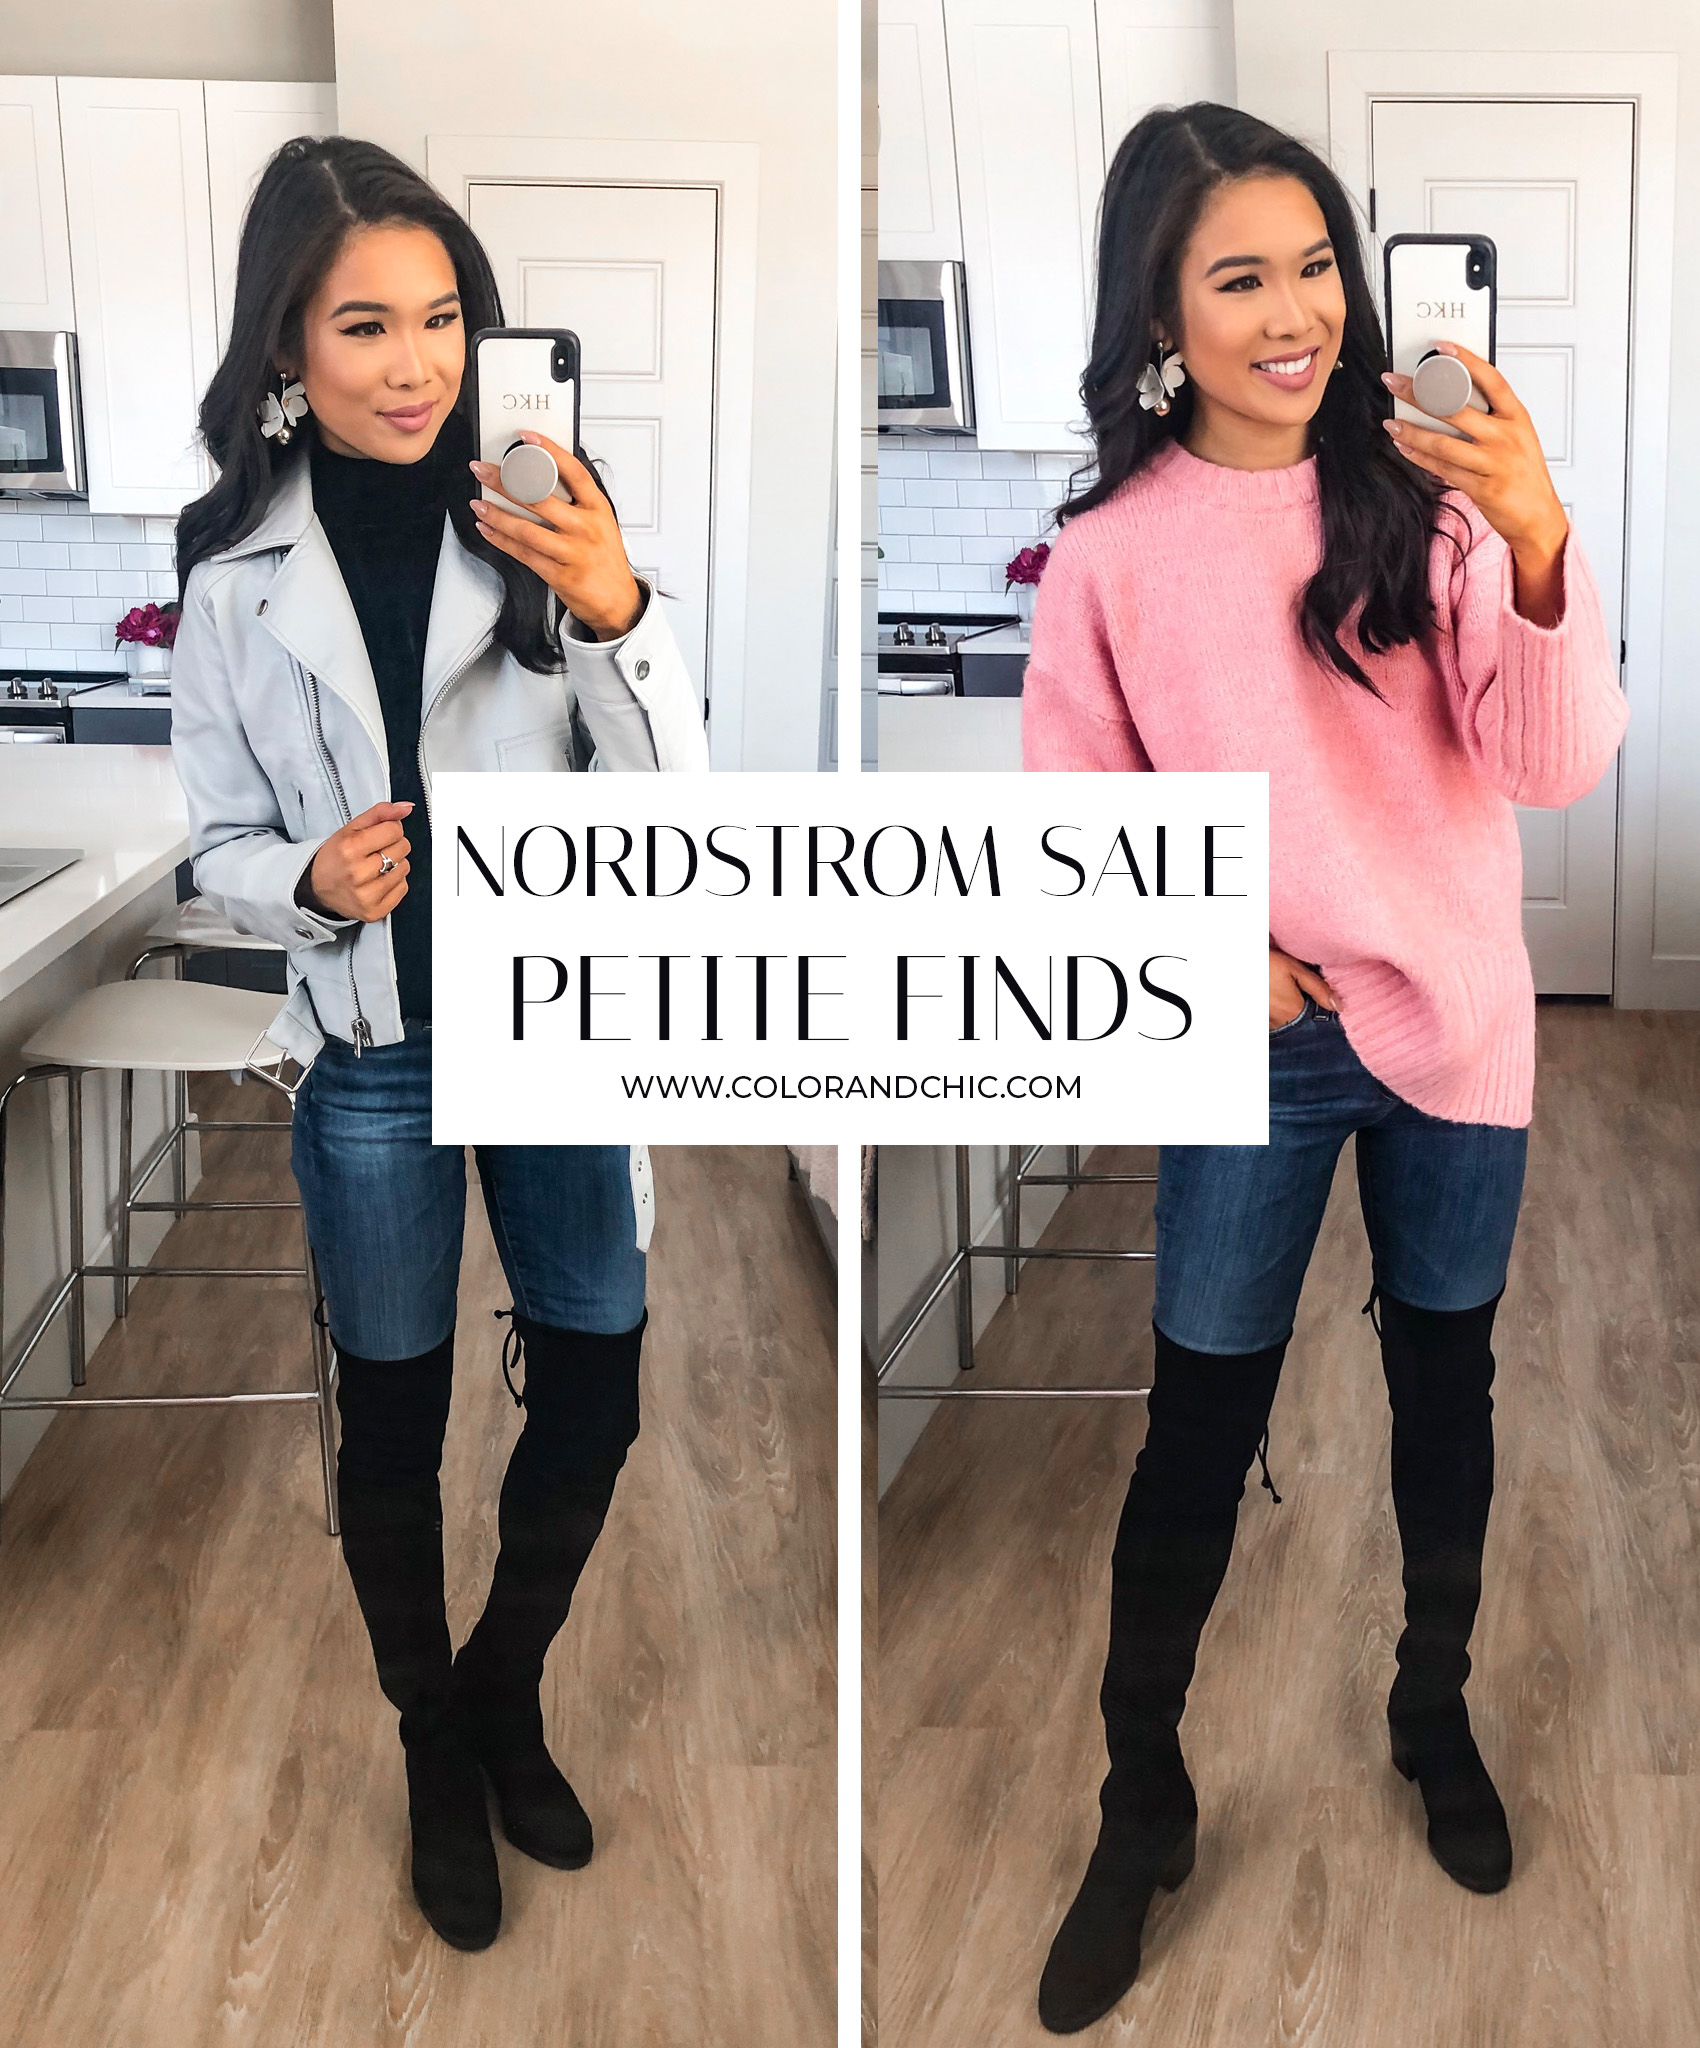 Blogger Hoang-Kim shares her petite picks from the Nordstrom Anniversary Sale